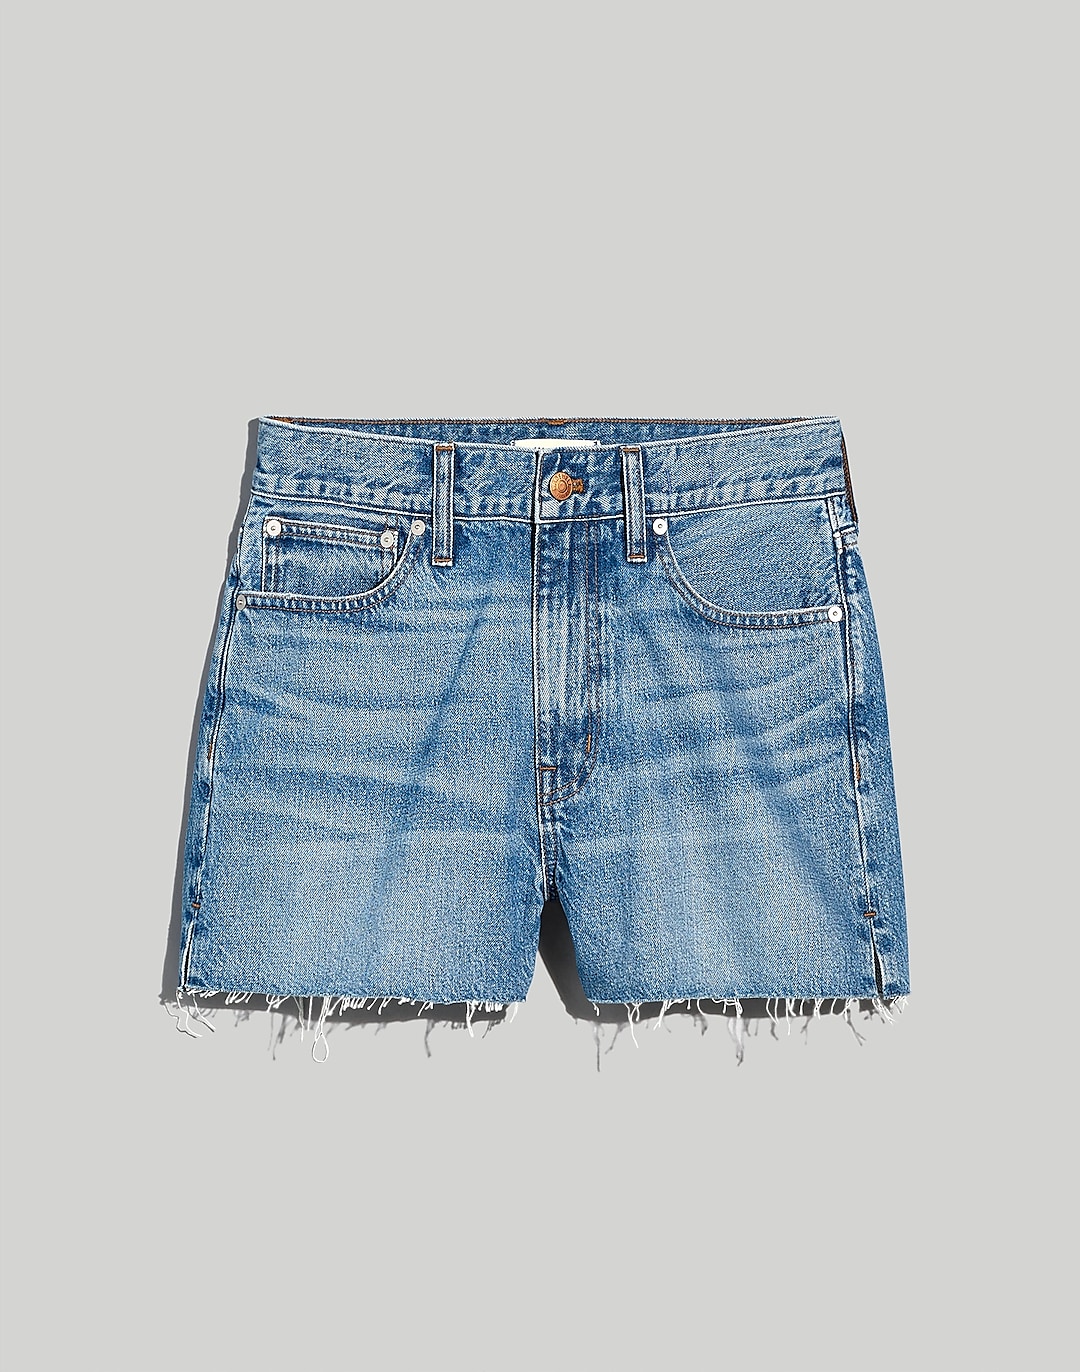 Relaxed Denim Shorts in Wisner Wash: Side-Slit Edition | Madewell